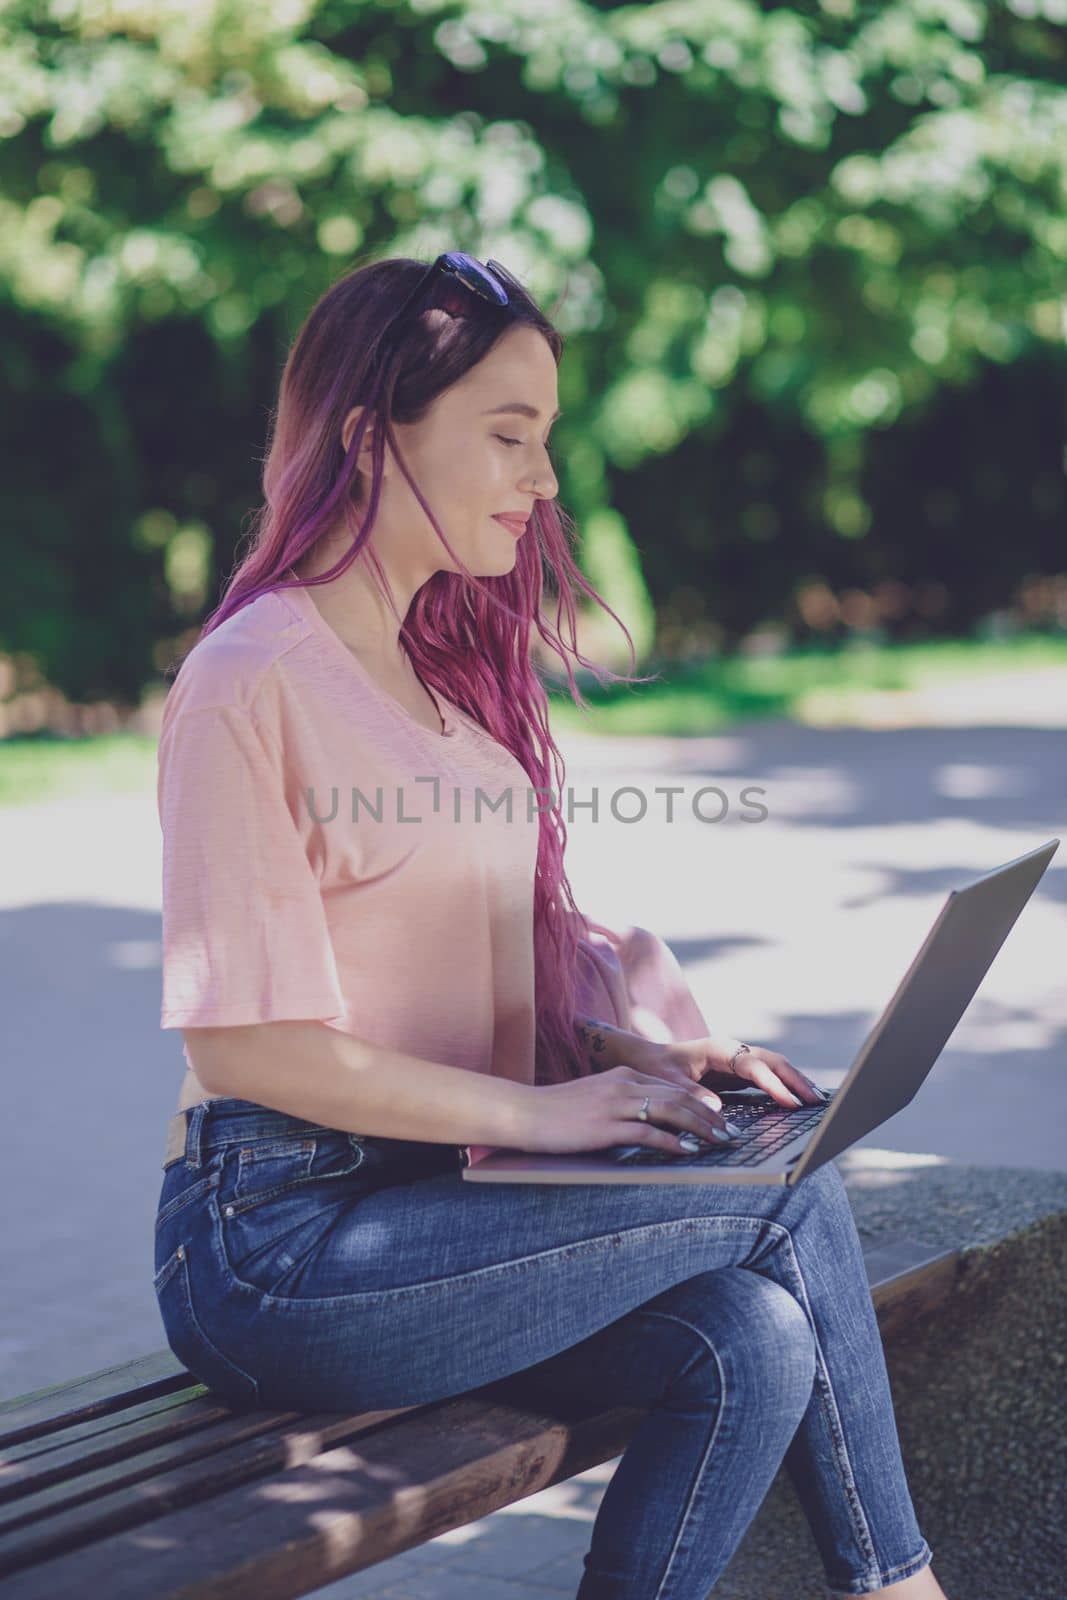 Young girl with pink hair is studying in the spring park, sitting on the wooden bench and browsing on her laptop